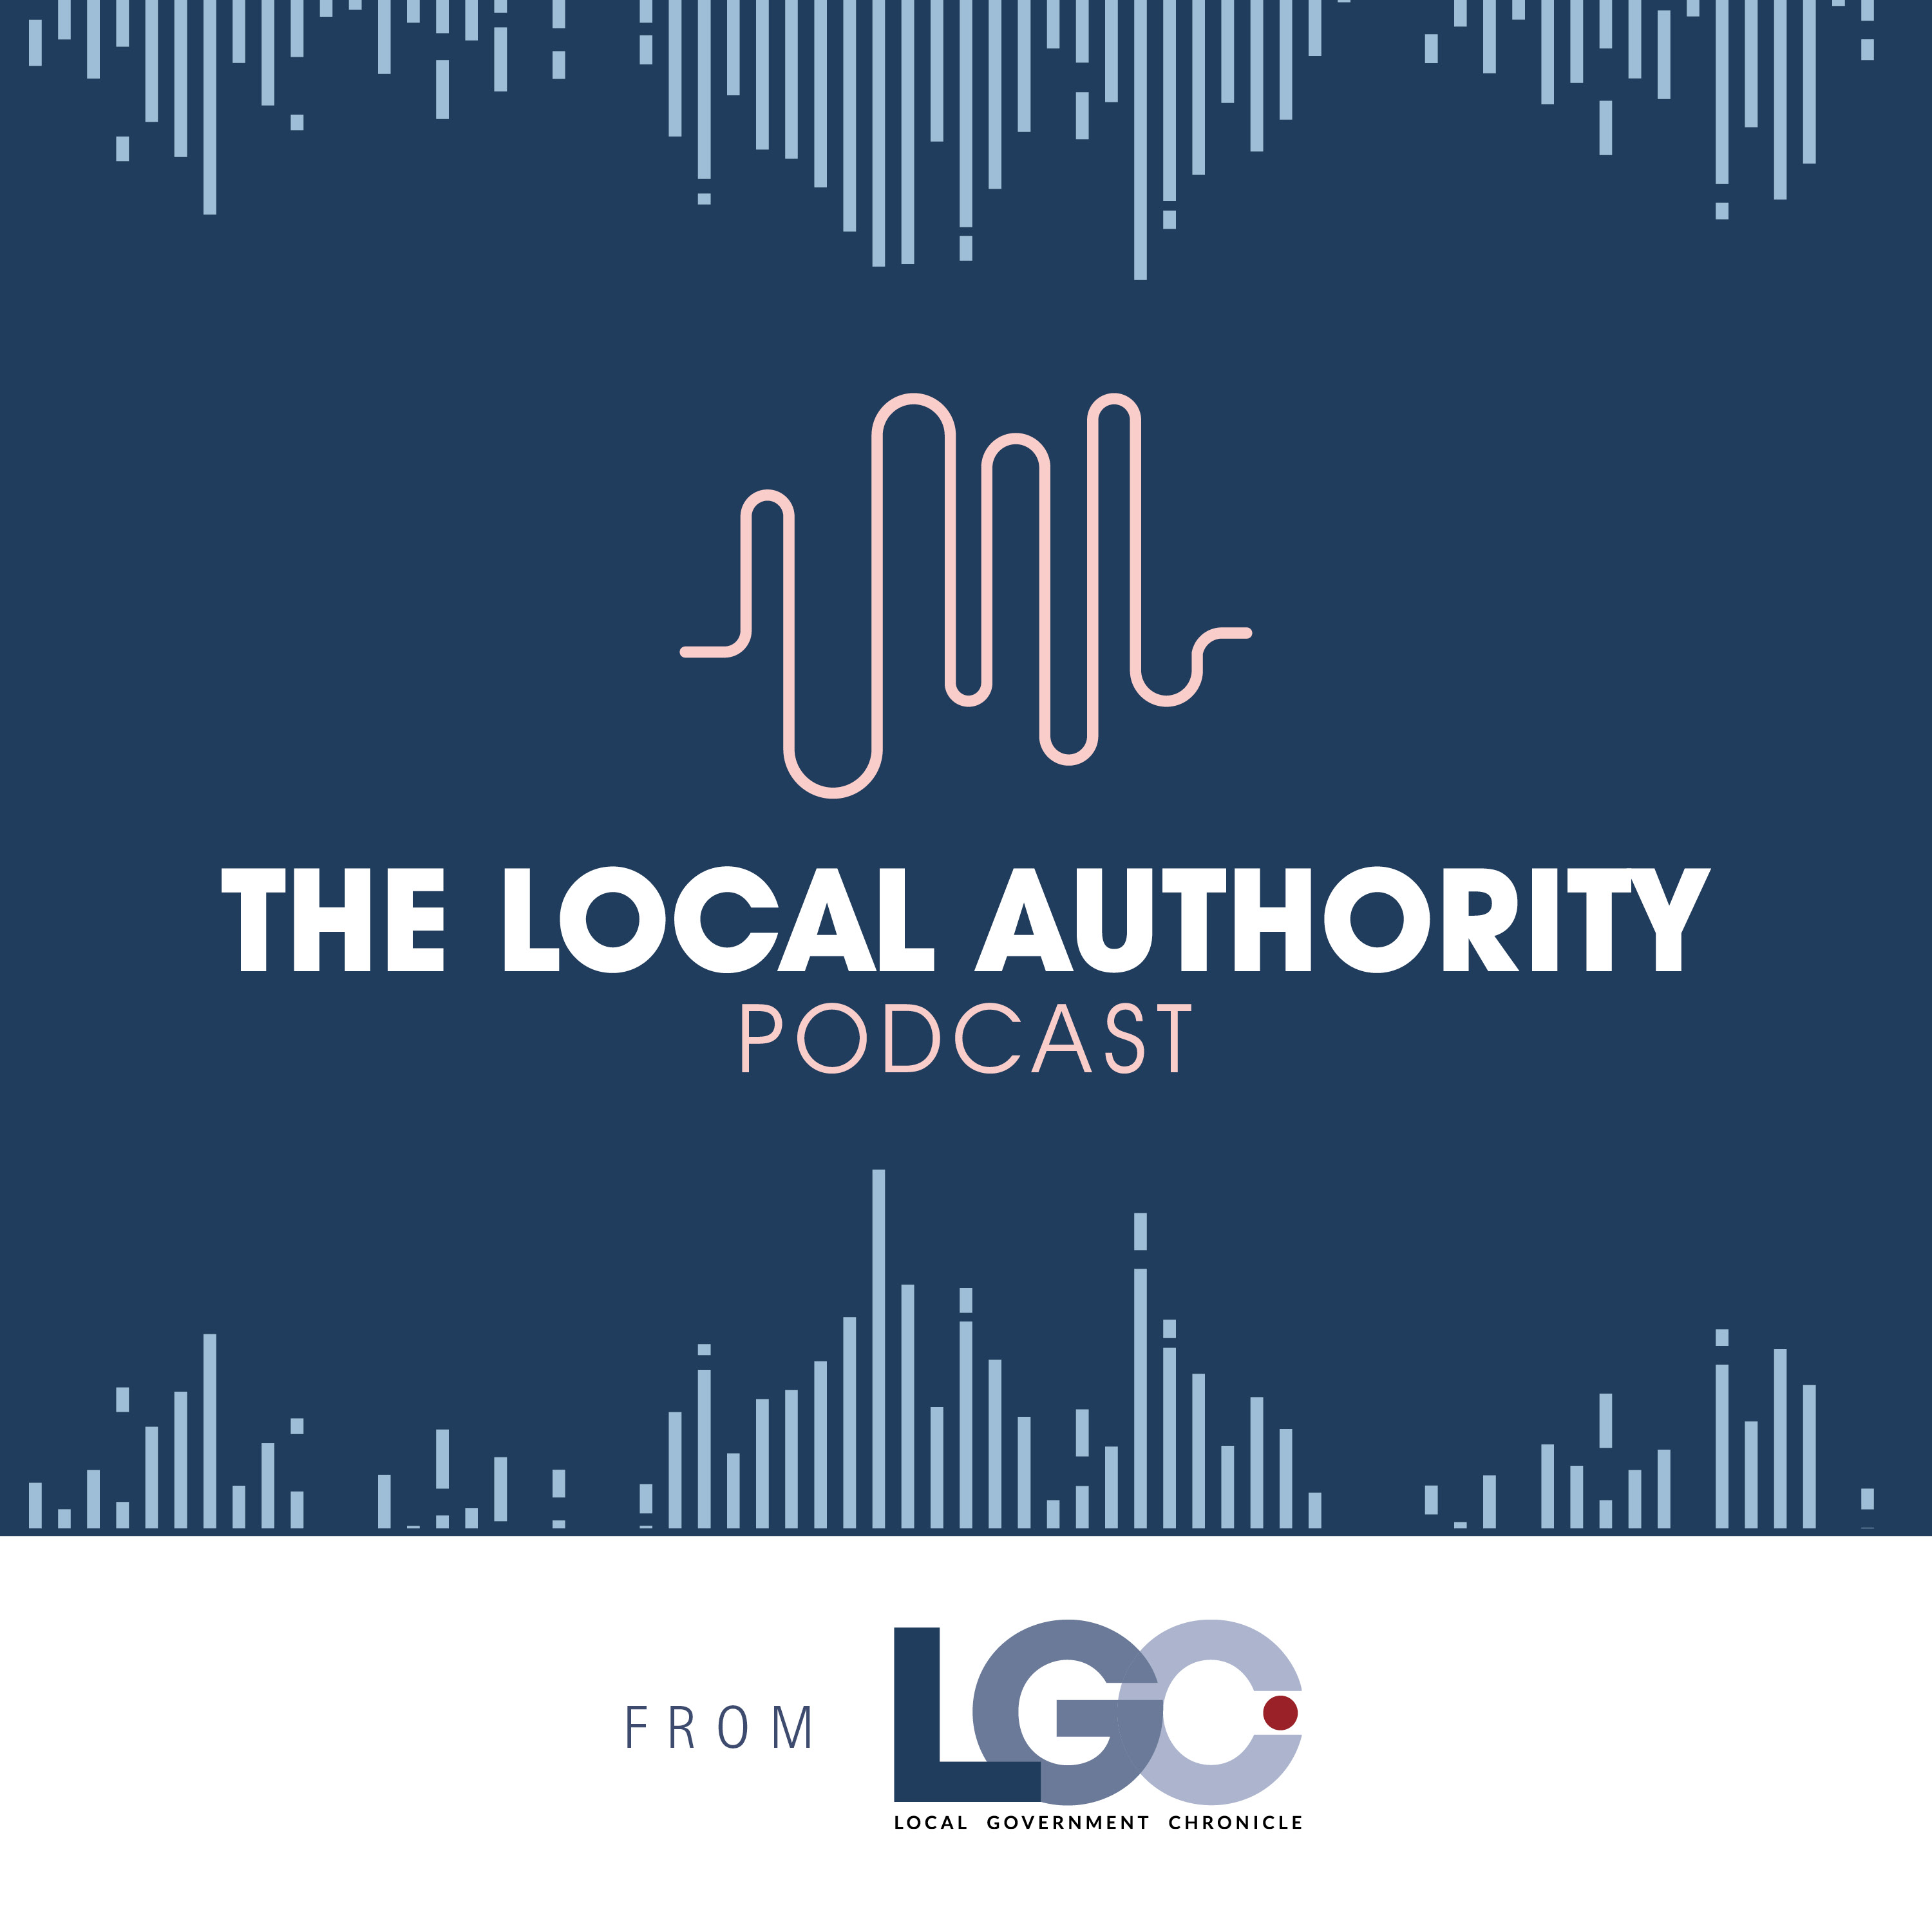 The Local Authority Podcast